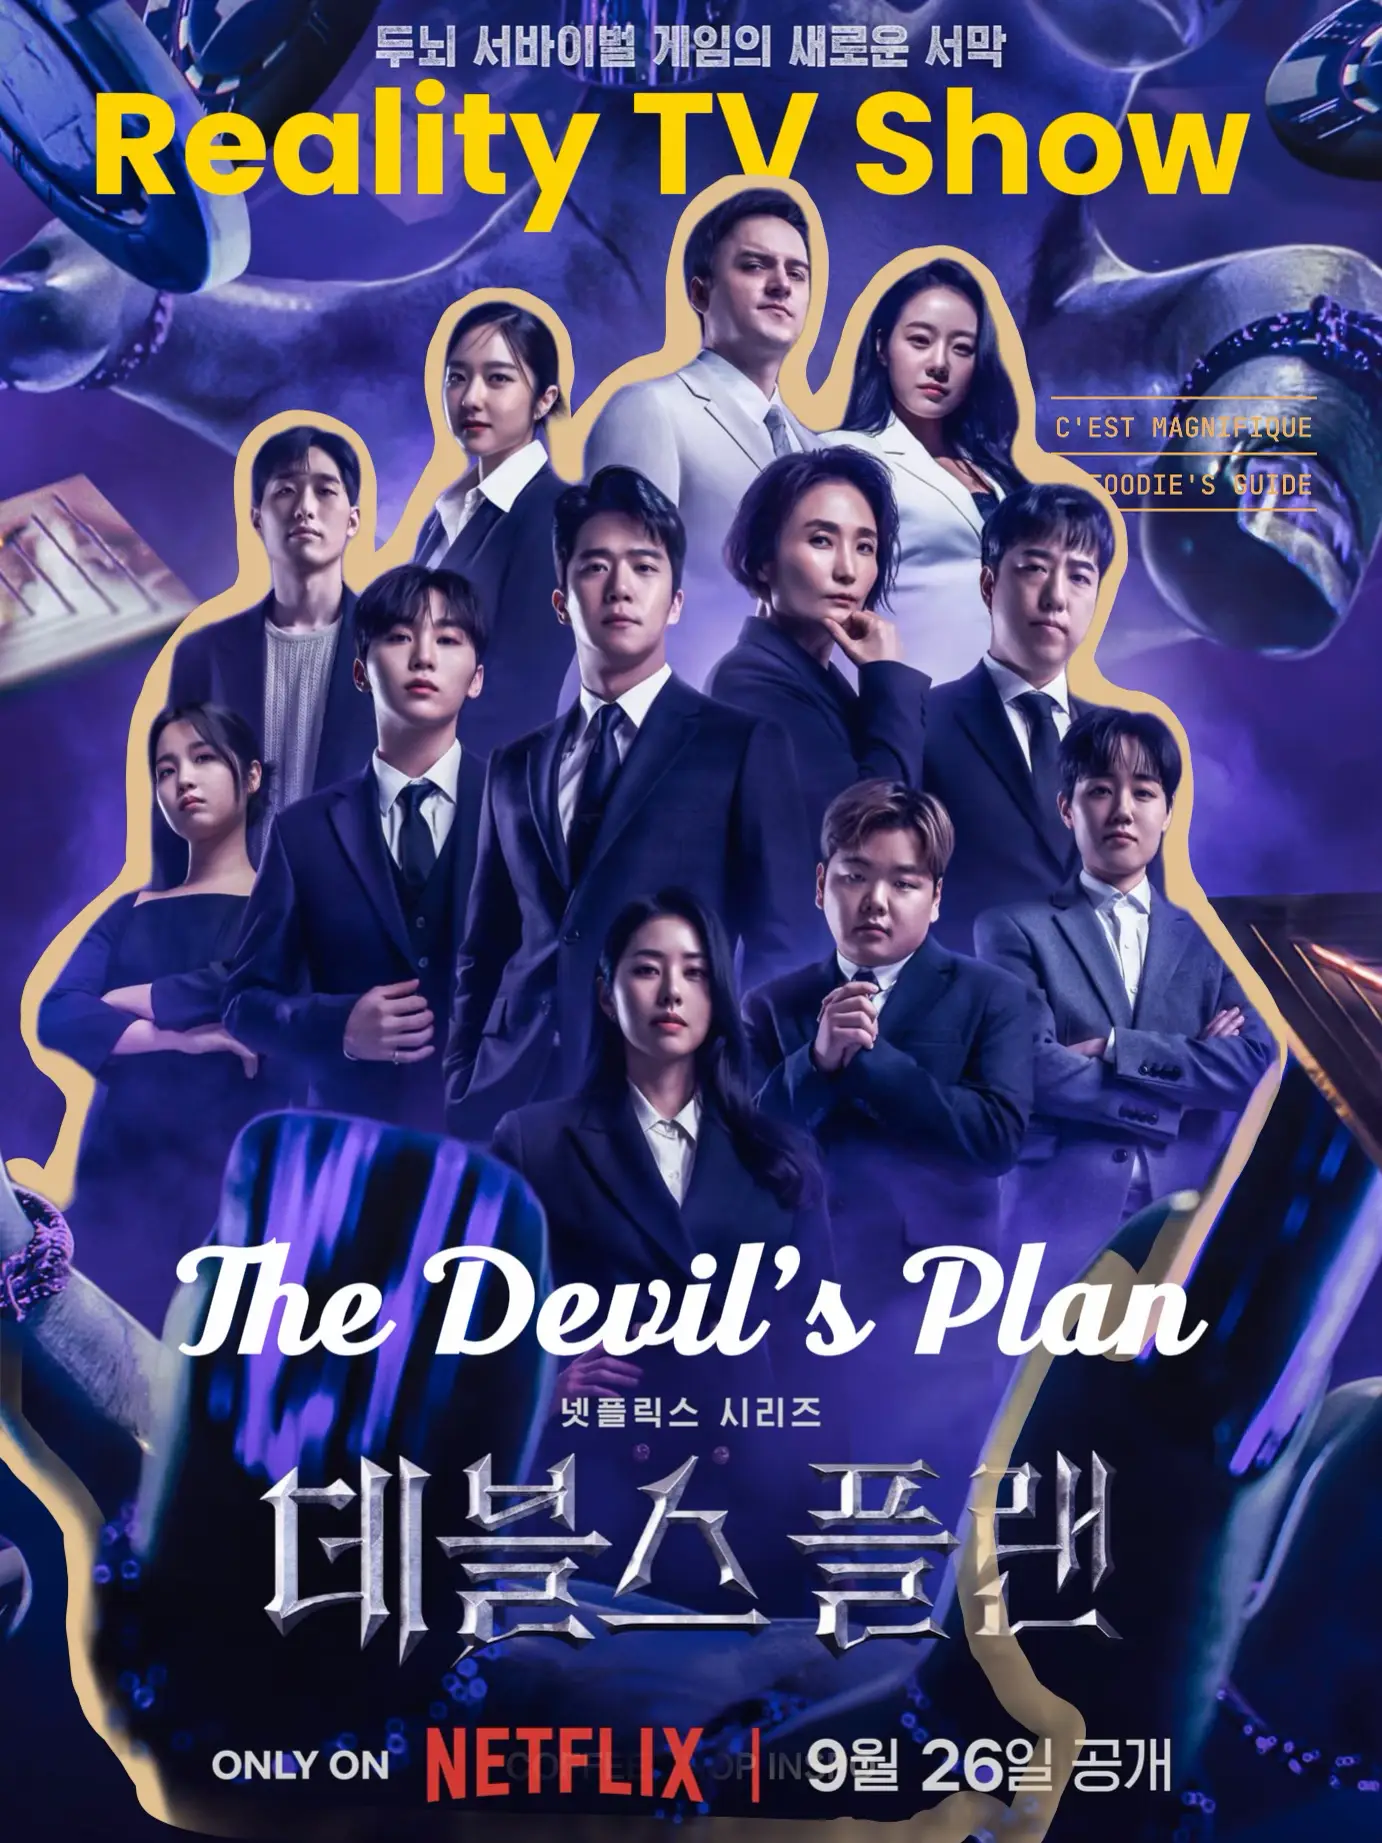 THE DEVIL'S PLAN: IS THIS NEW KOREAN TV SHOW BETTER THAN SQUID GAME? 